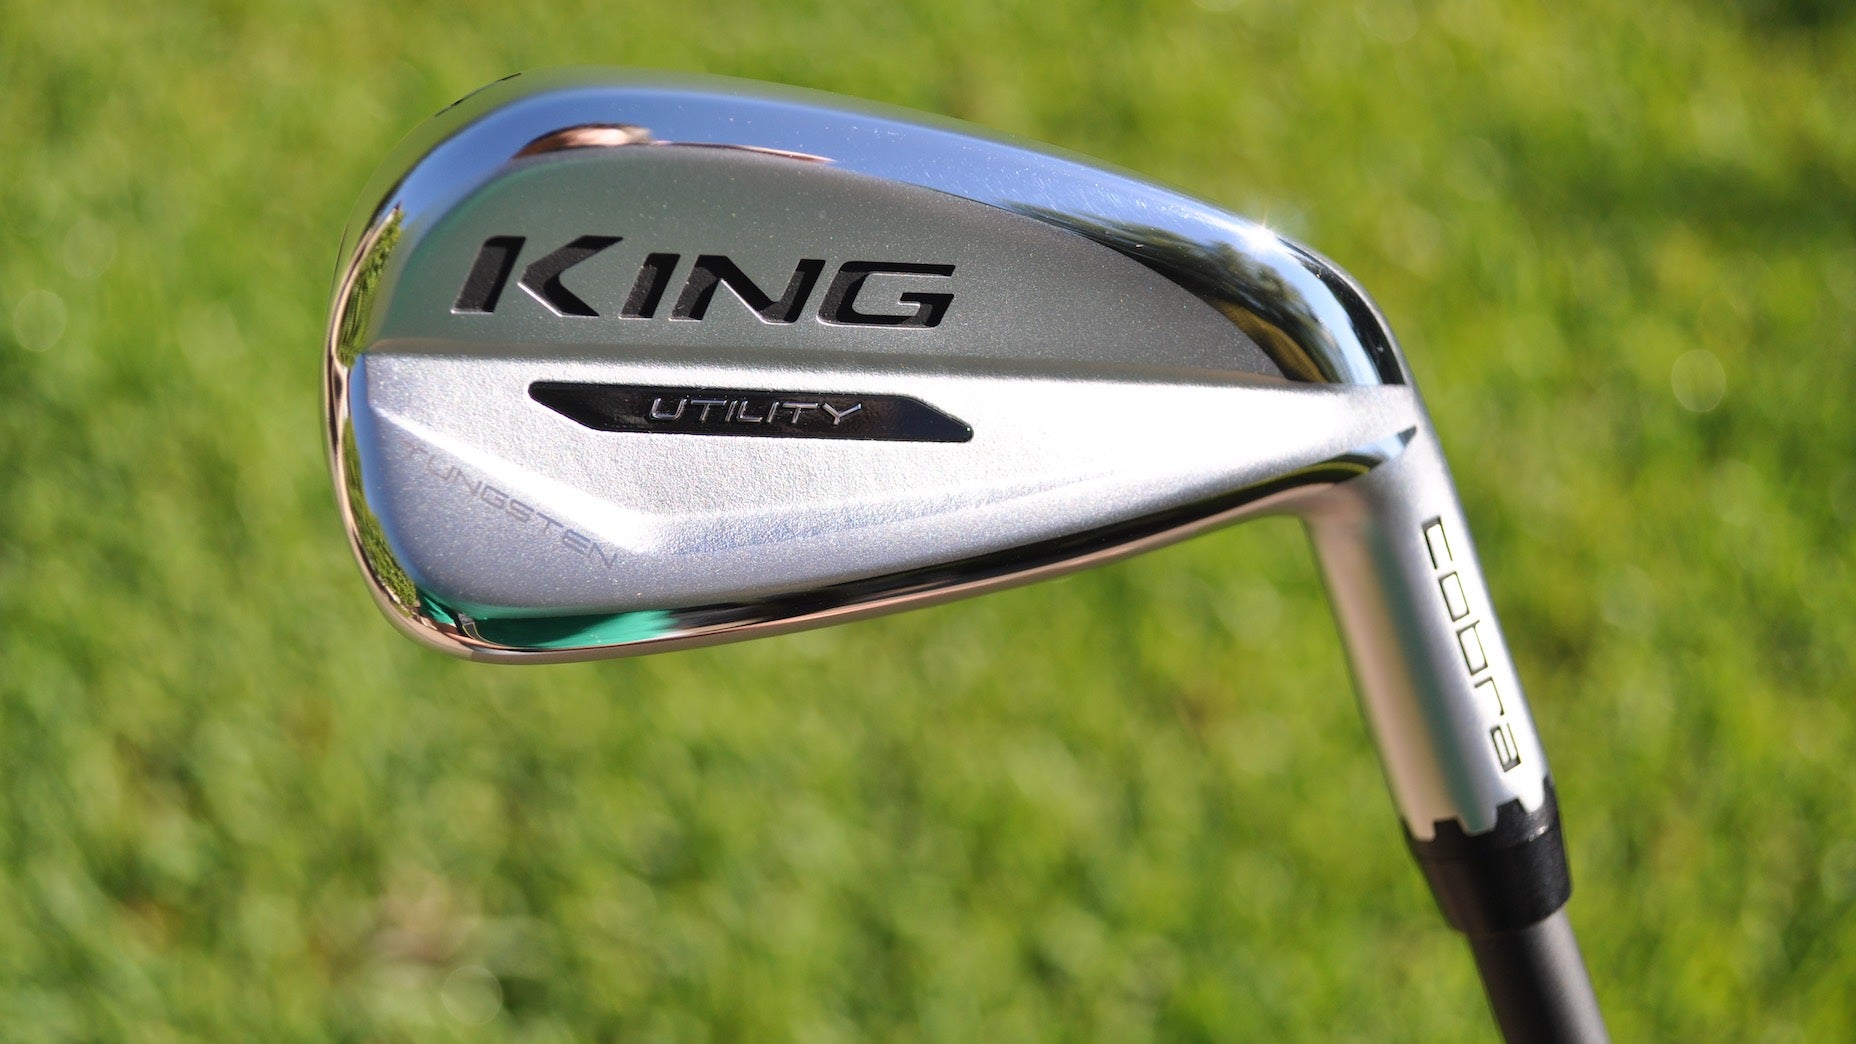 Cobra's adjustable King Utility iron and MIM Black wedges: FIRST LOOK